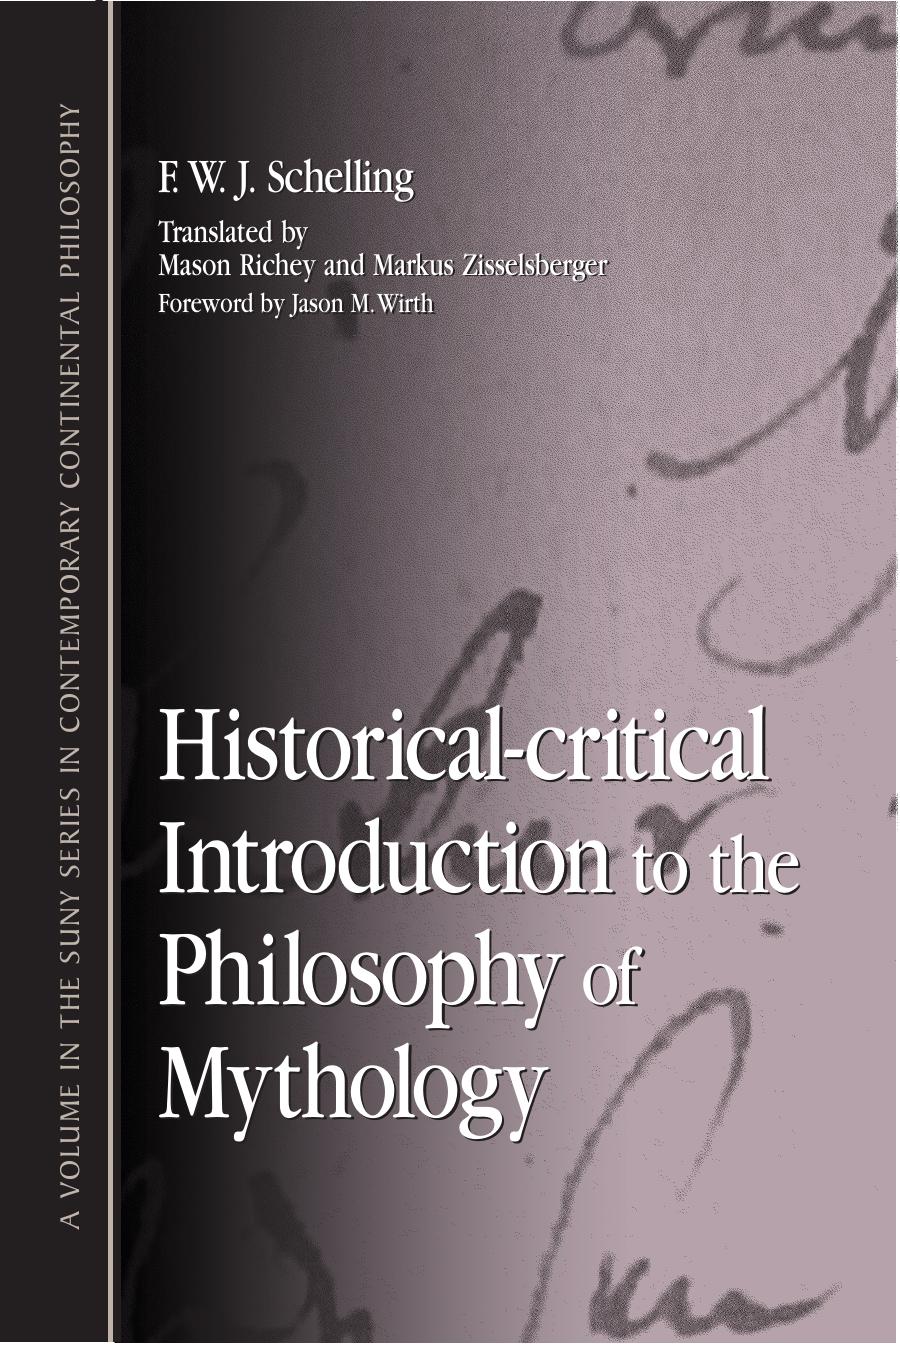 Historical-critical introduction to the philosophy of mythology